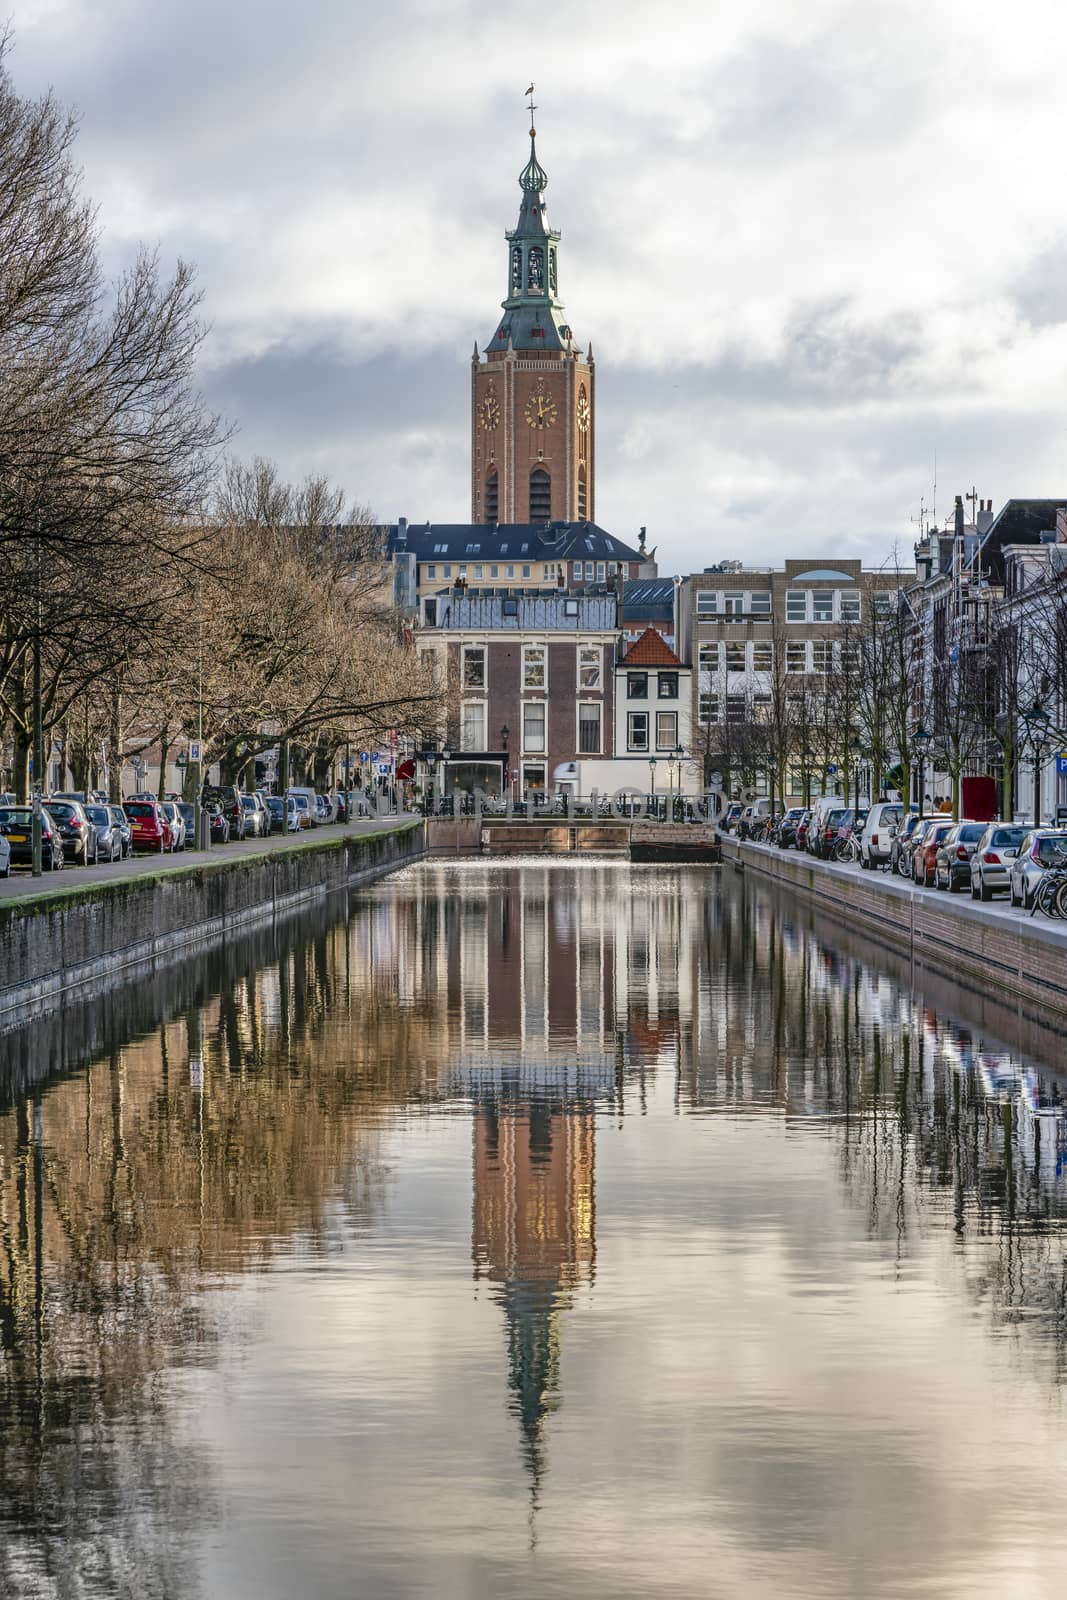 Saint James church reflected on the canal calm water nested to the royal stable, in The Hague 